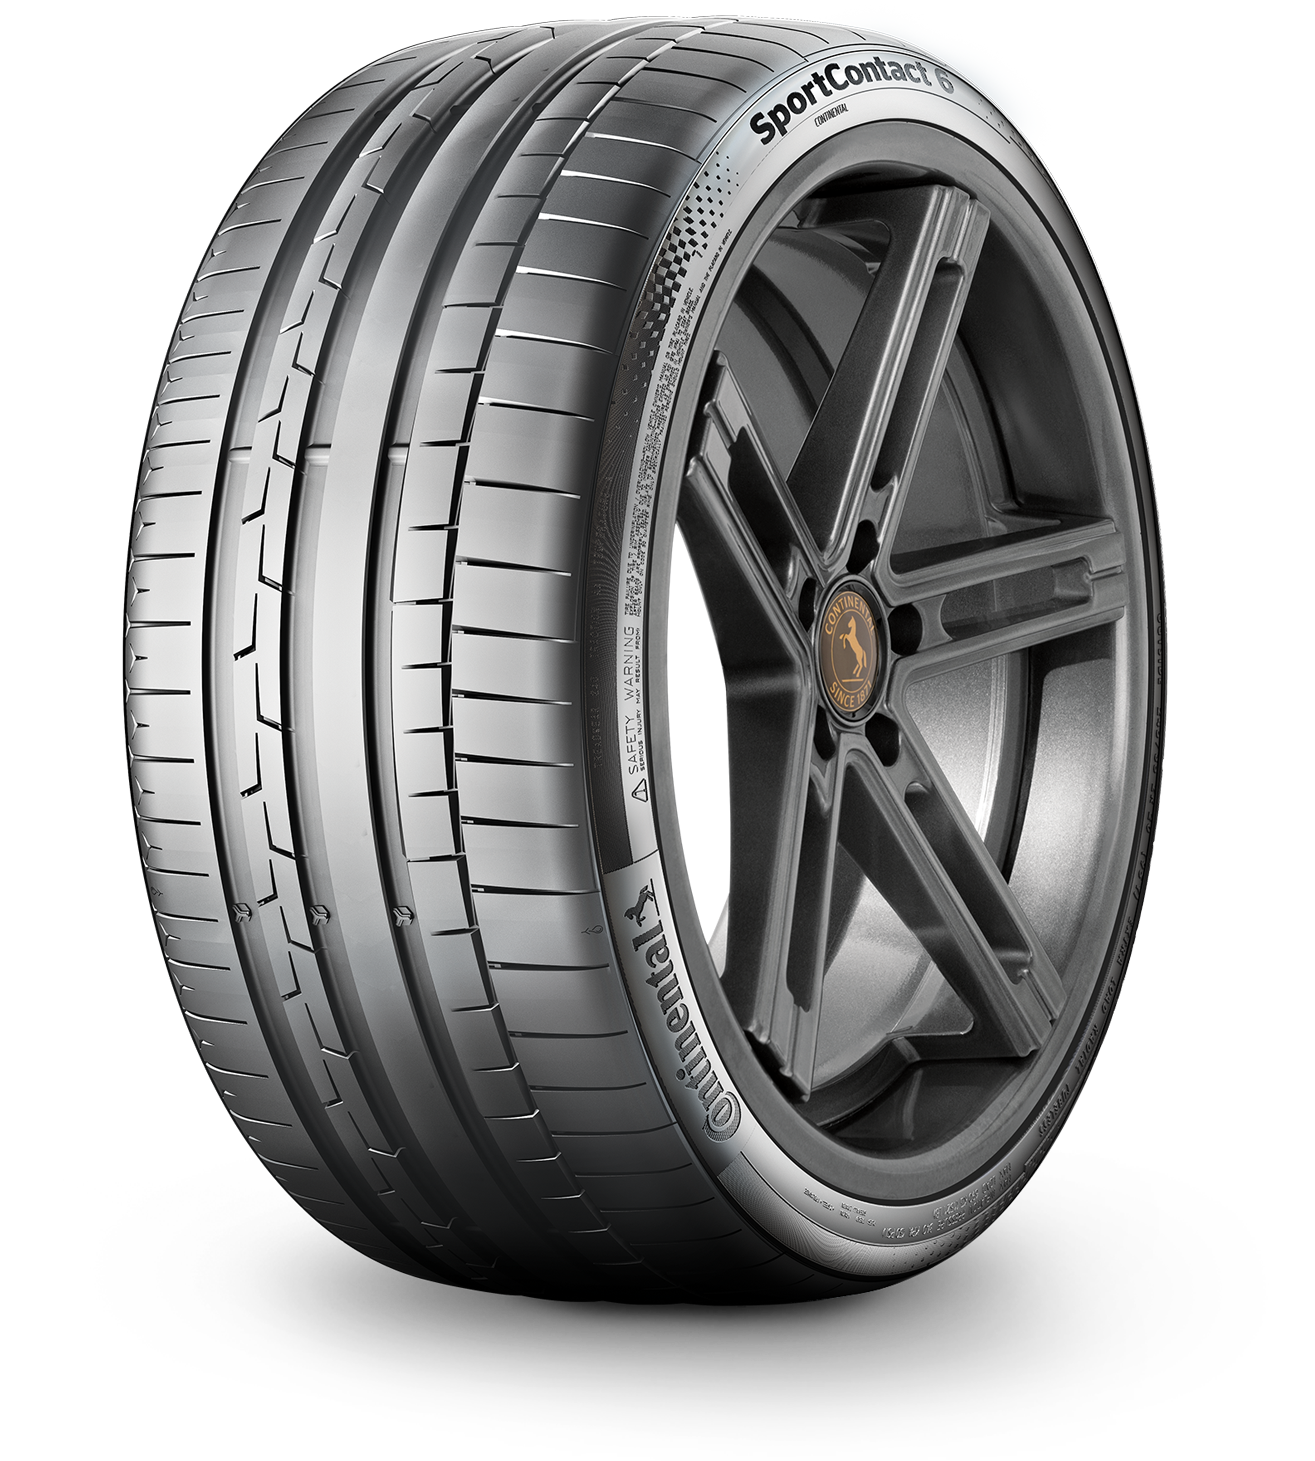 Continental Sport Contact 6 - Tyre Reviews and Tests